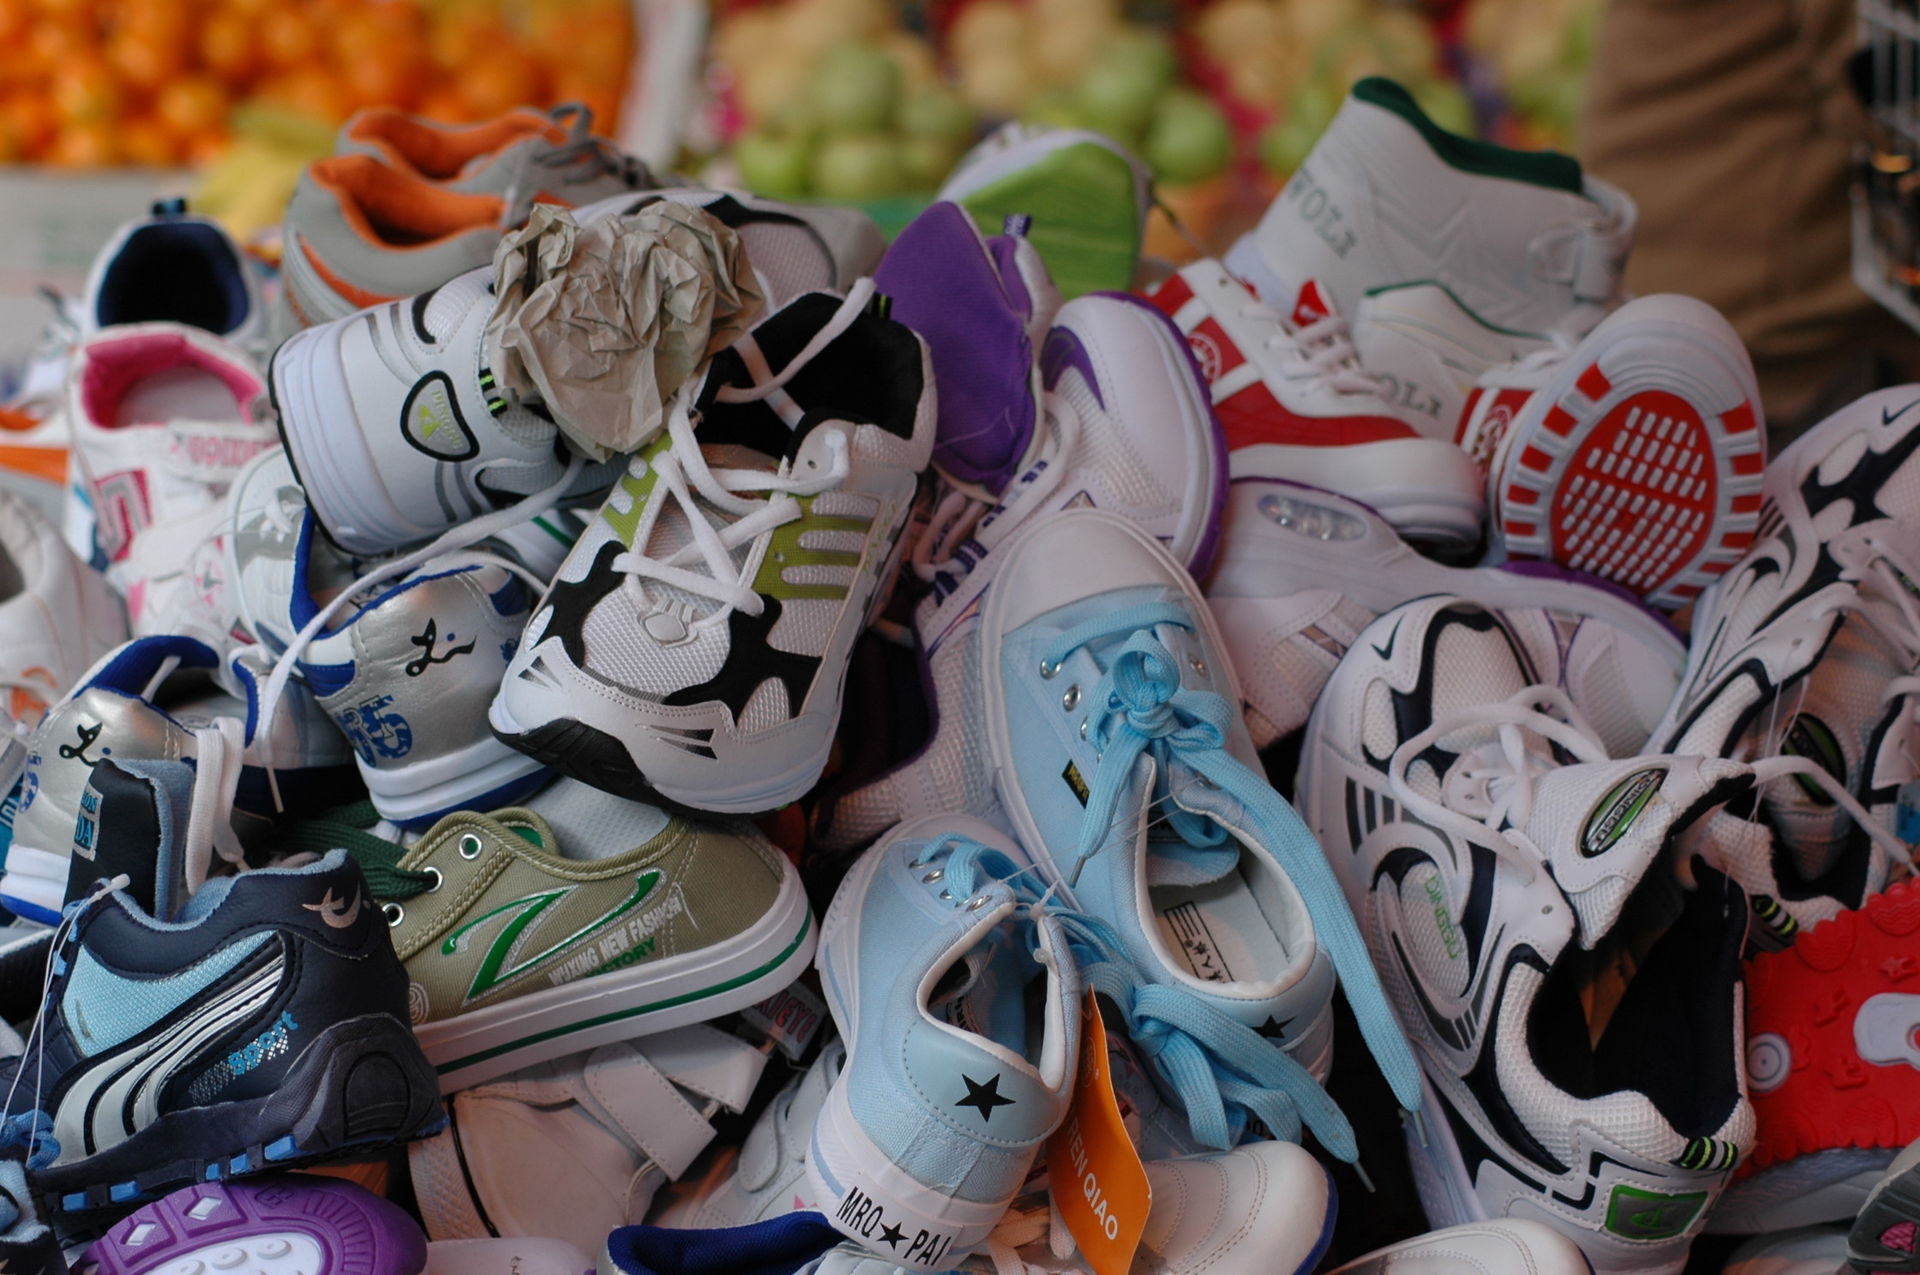 Pile of shoes with fruit in the background.